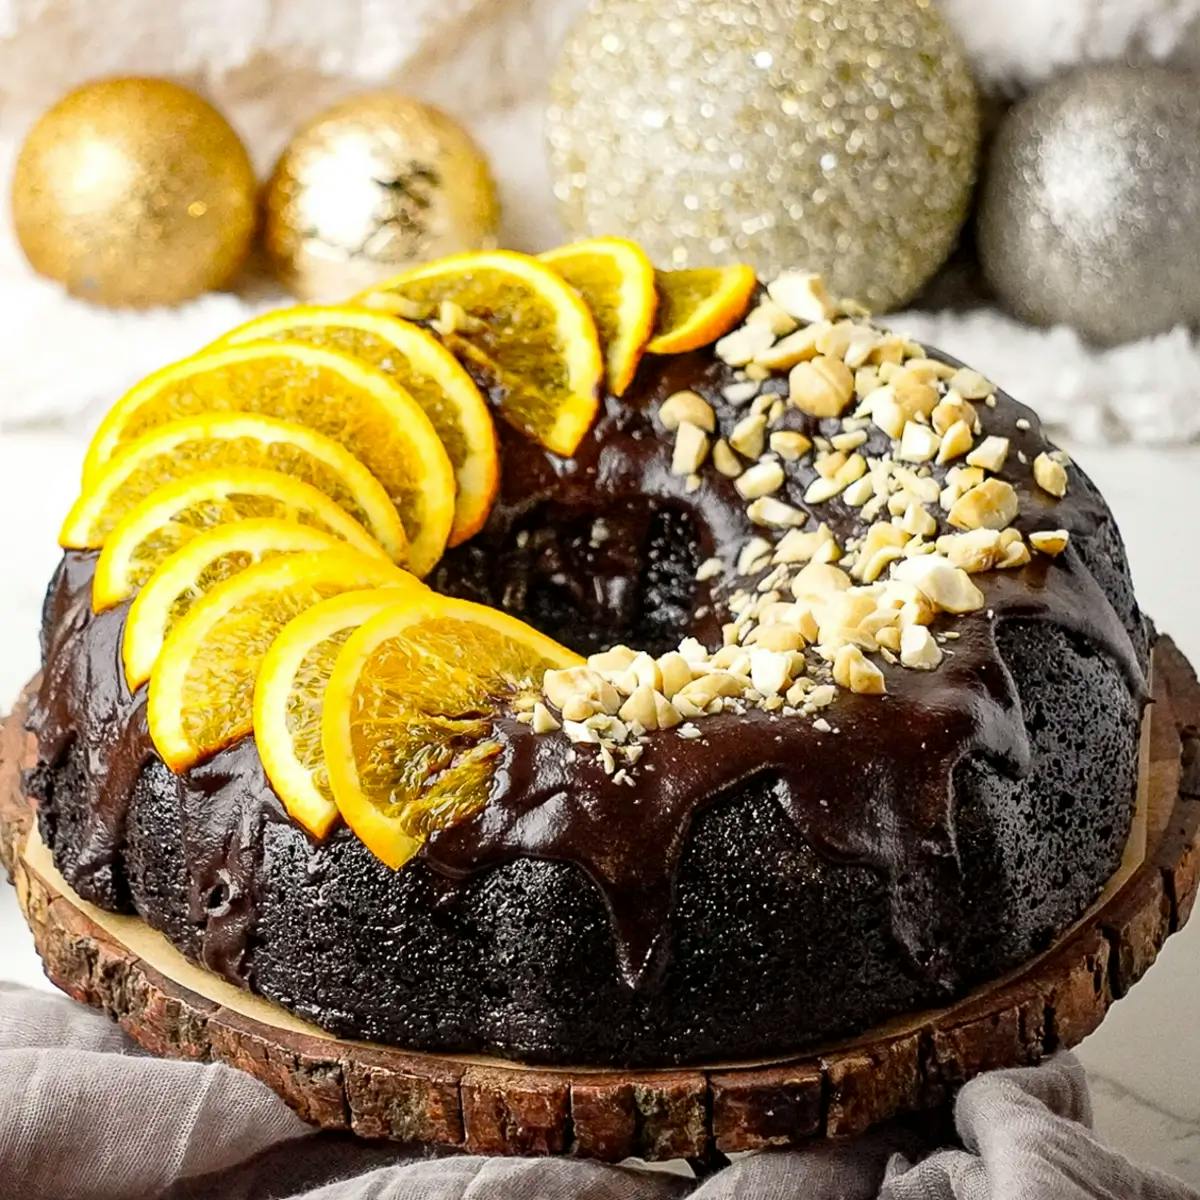 Vegan chocolate orange cake covered in vegan chocolate ganache and decorated with nuts and orange slices.